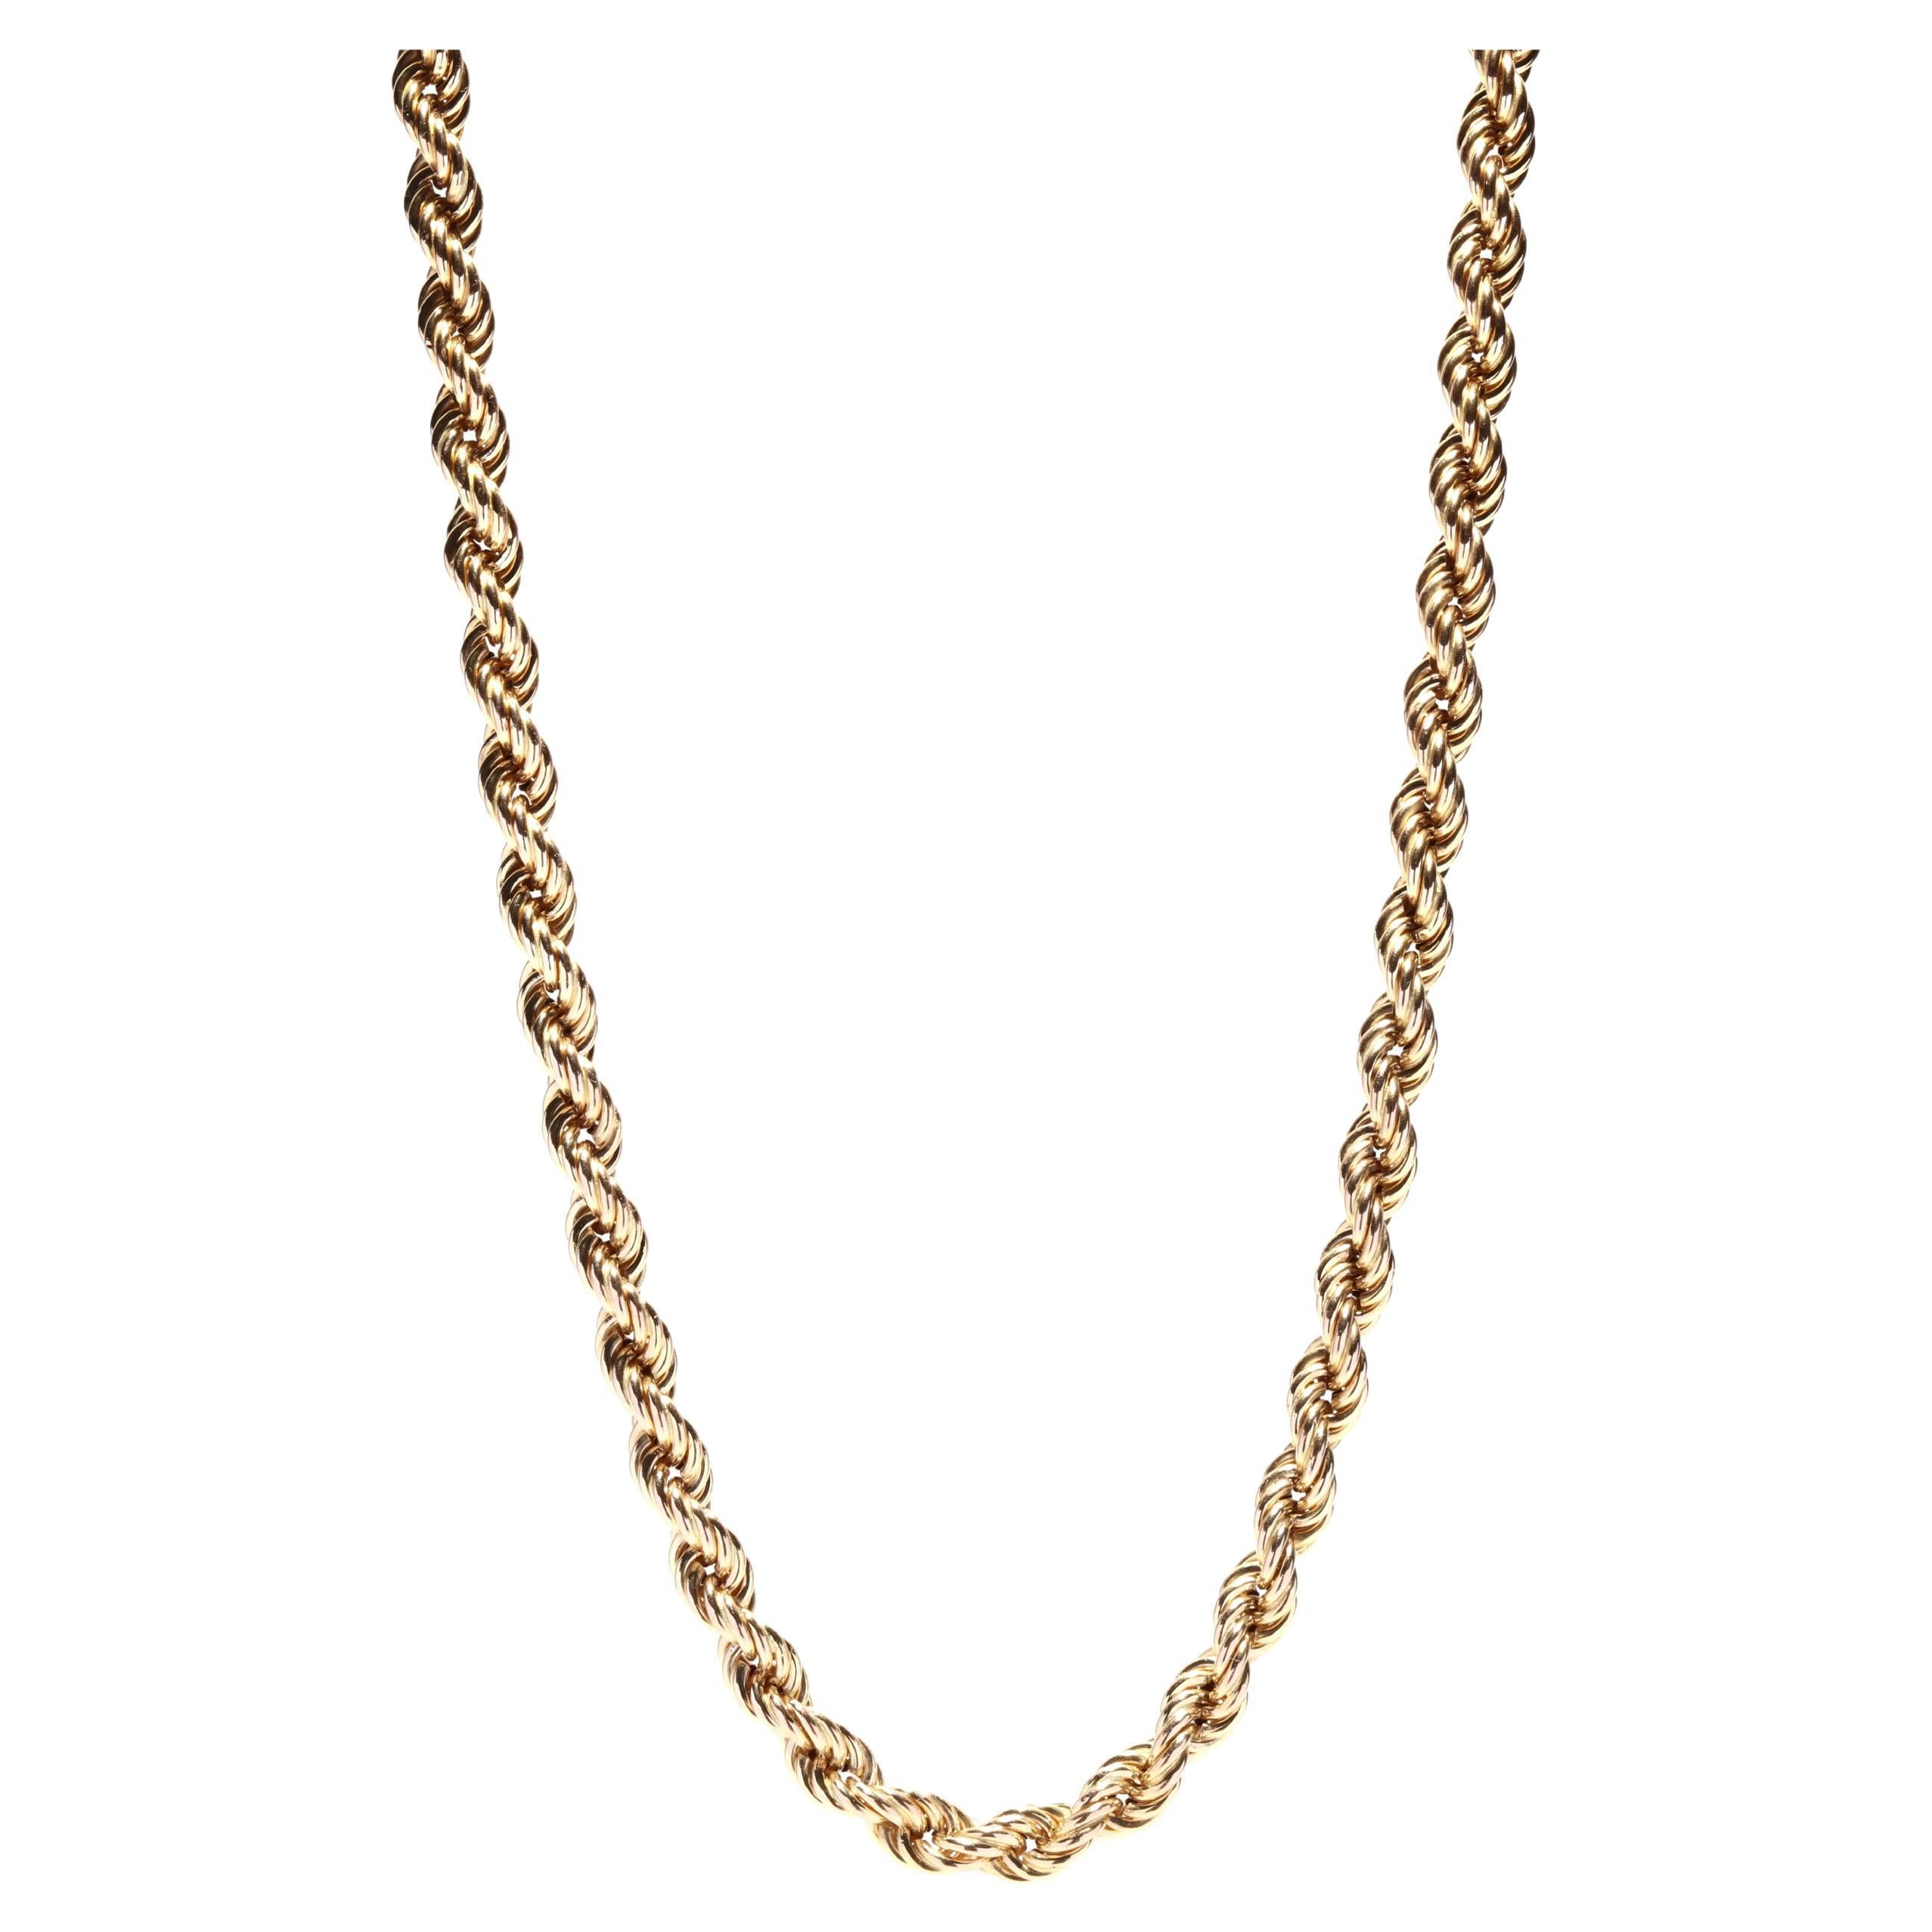 Vintage Rope Chain, Thick Rope Chain, 14K Gold, Large Gold Rope Chain